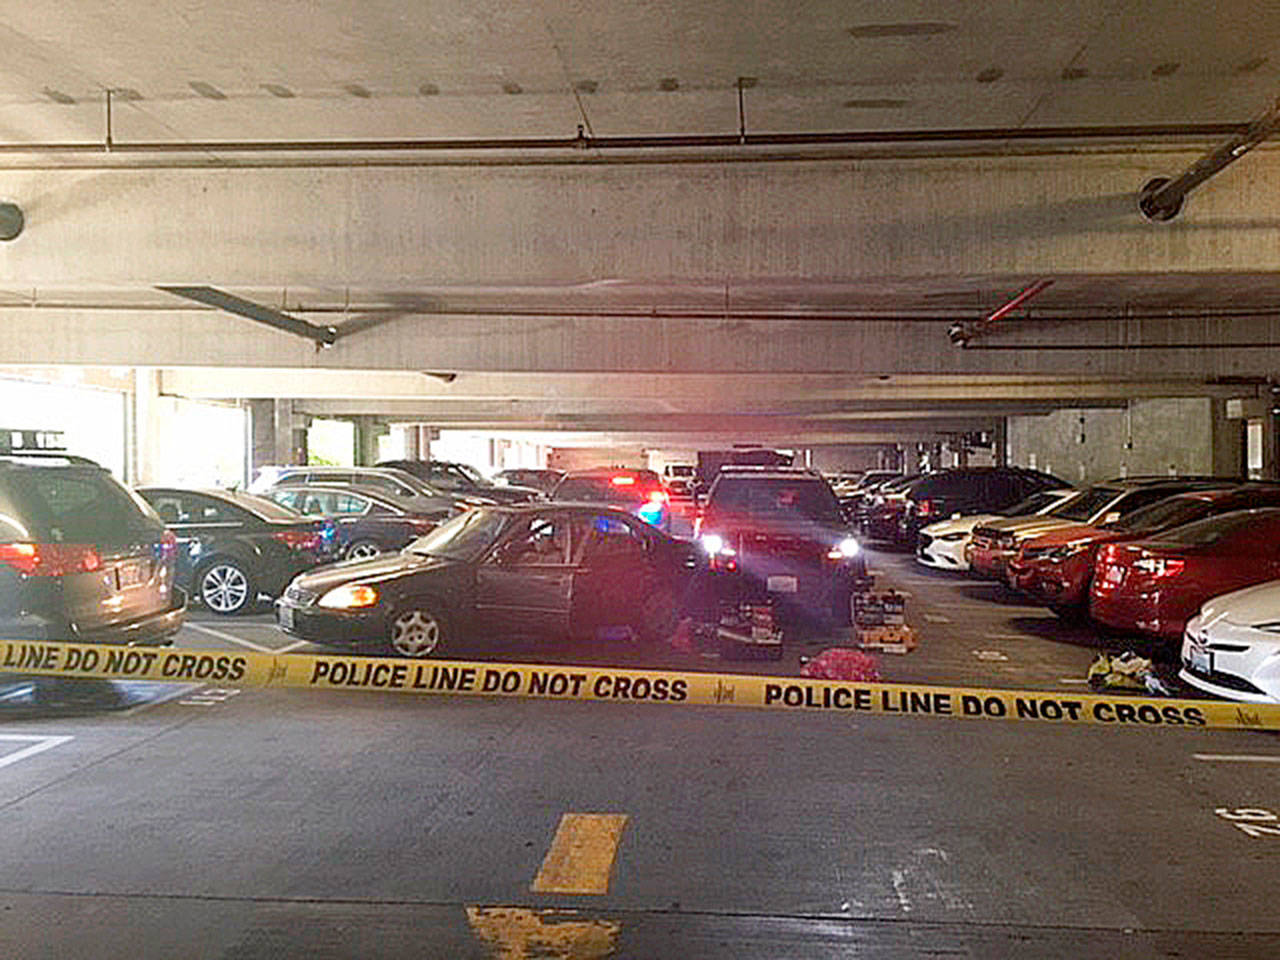 The scene in the Kent Station garage where a deputy fatally shot a man who was the driver in a stolen vehicle. COURTESY PHOTO, King County Sheriff’s Office